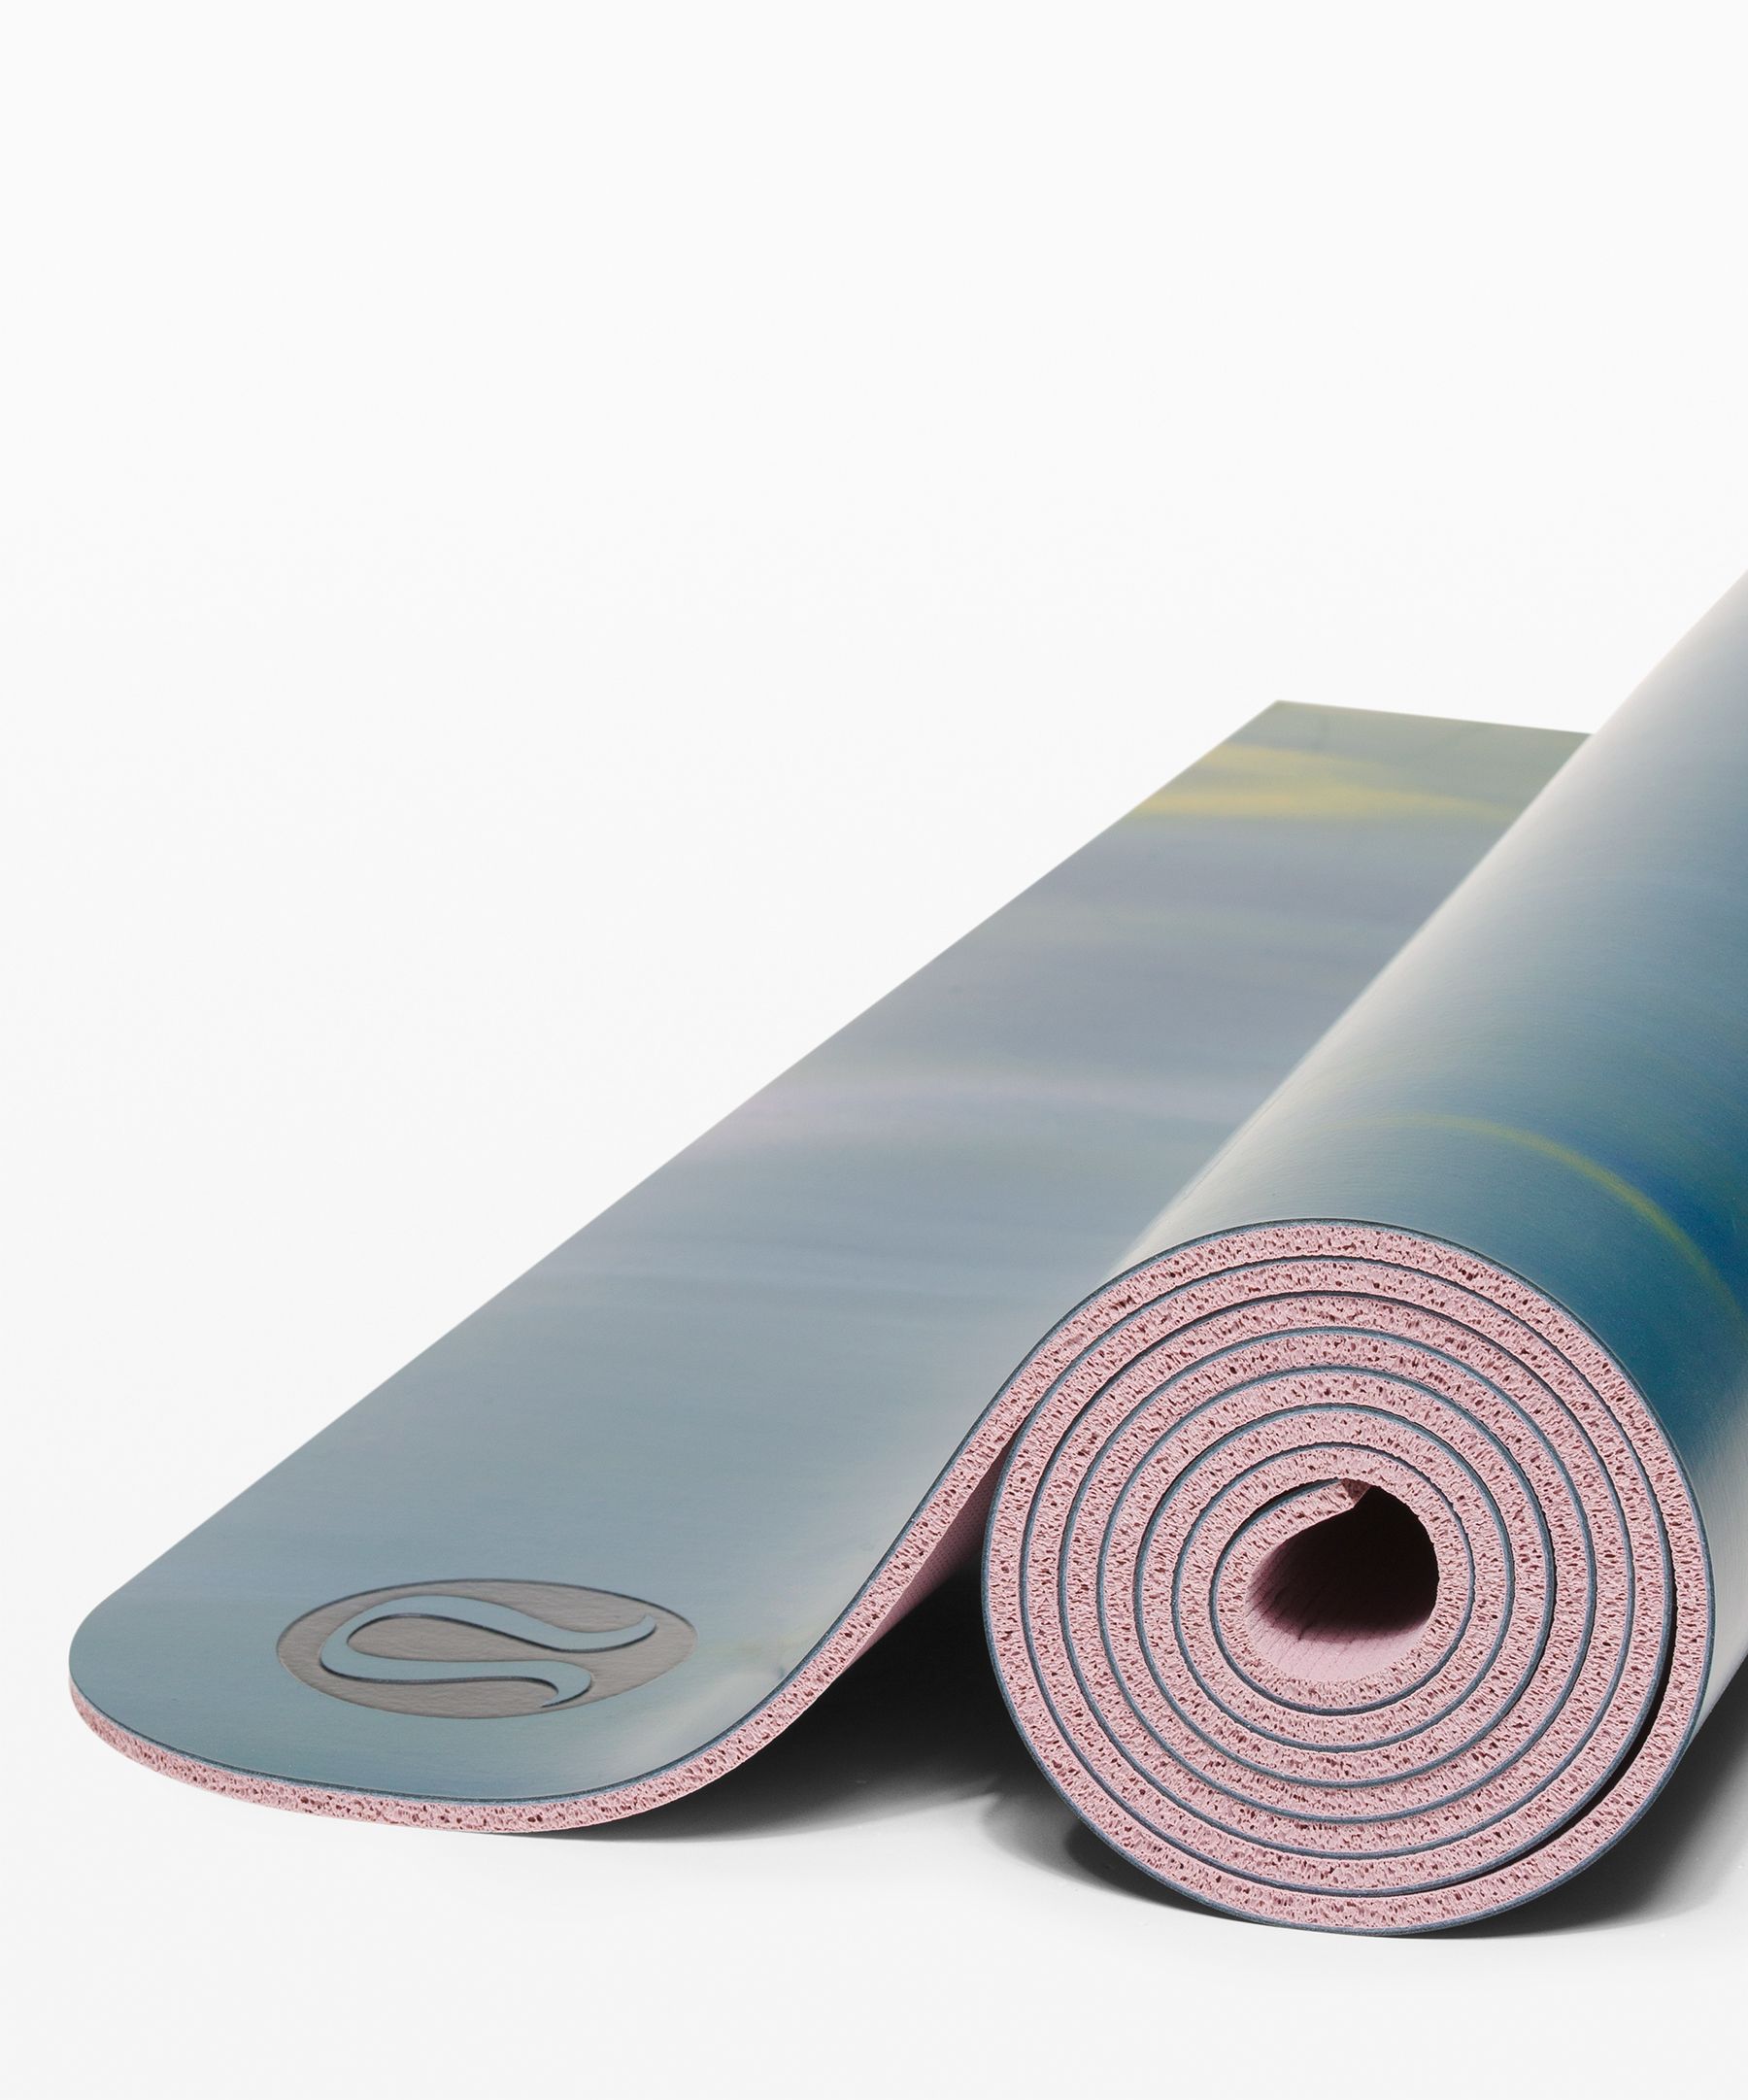 lululemon yoga mat which side up